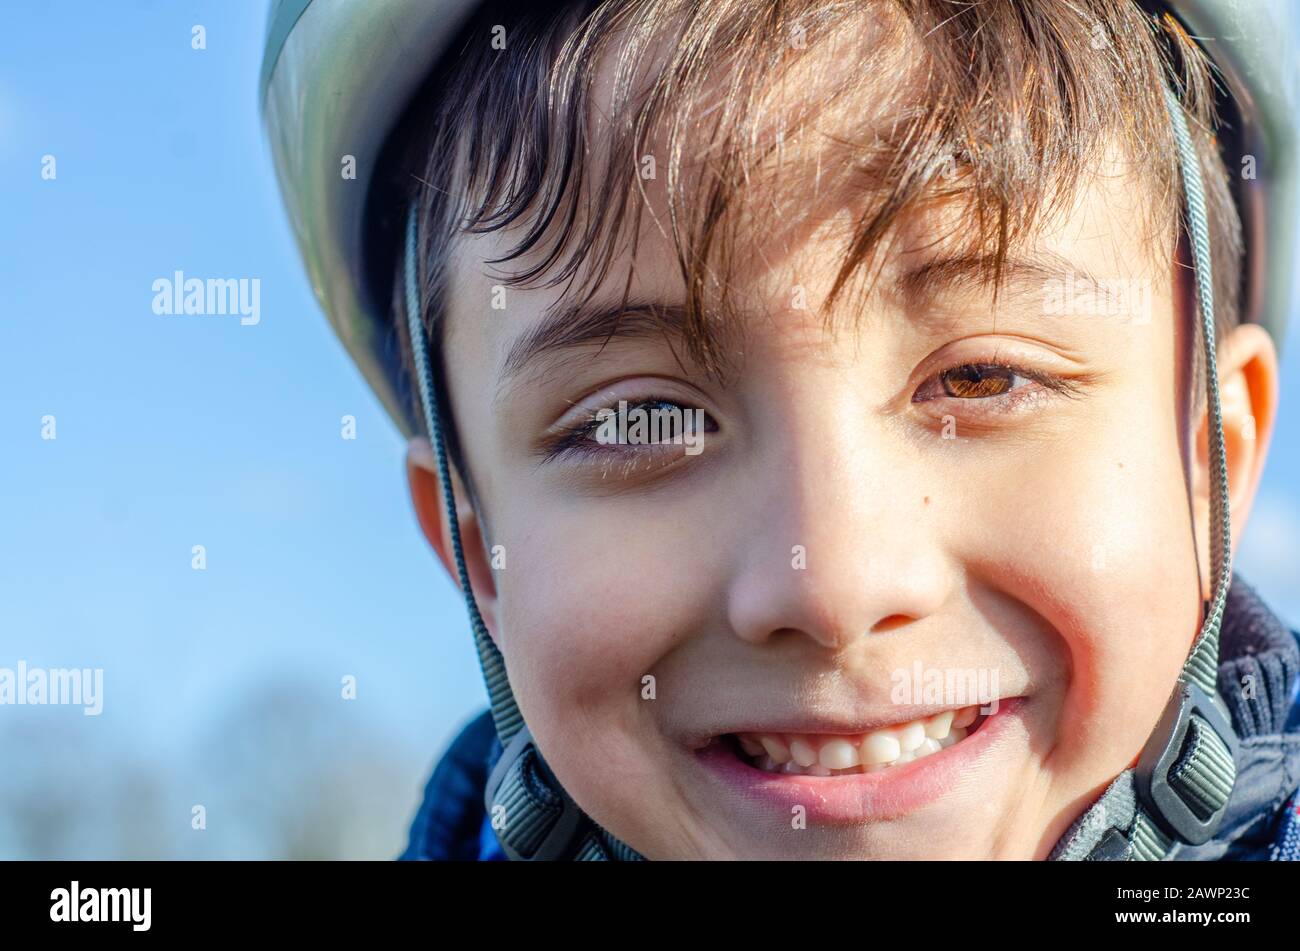 Portrait of a young boy outdoors wearing a bicycle helmet and smiling. Stock Photo